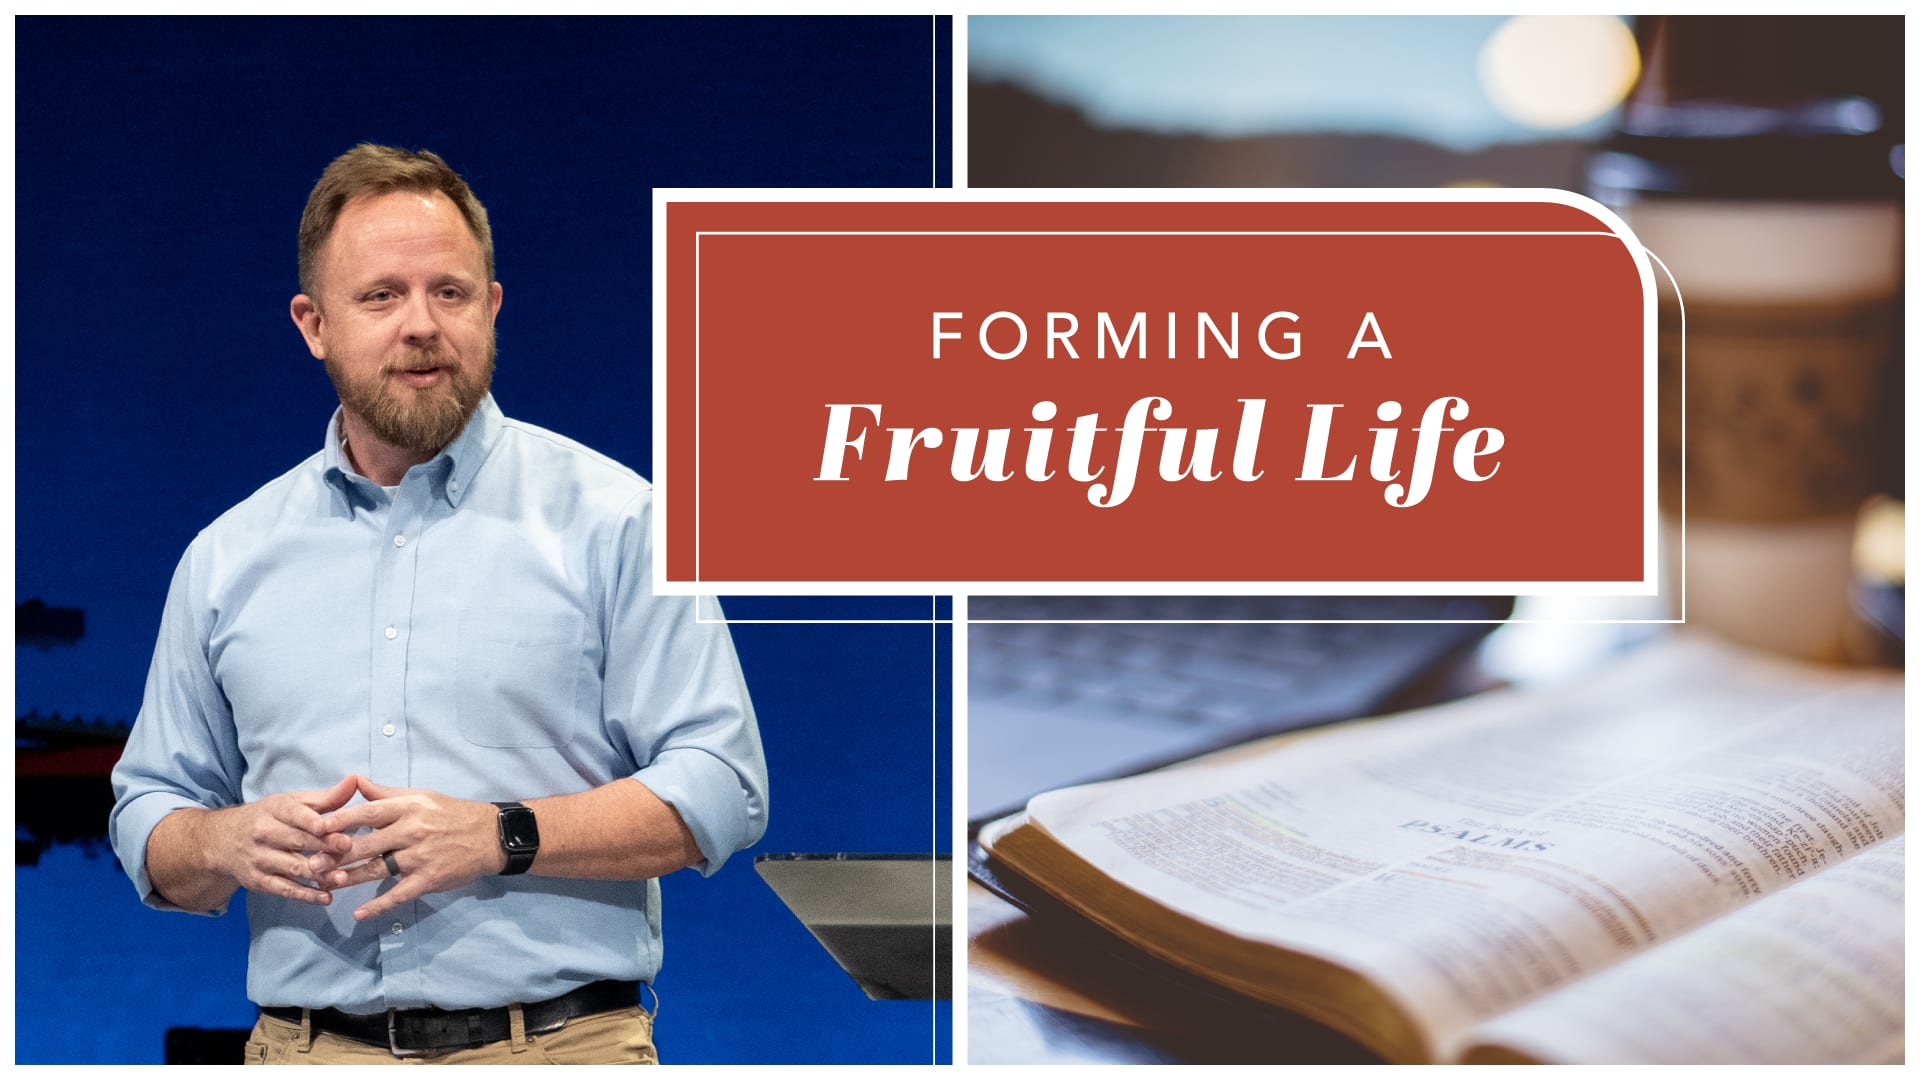 Forming a Fruitful Life